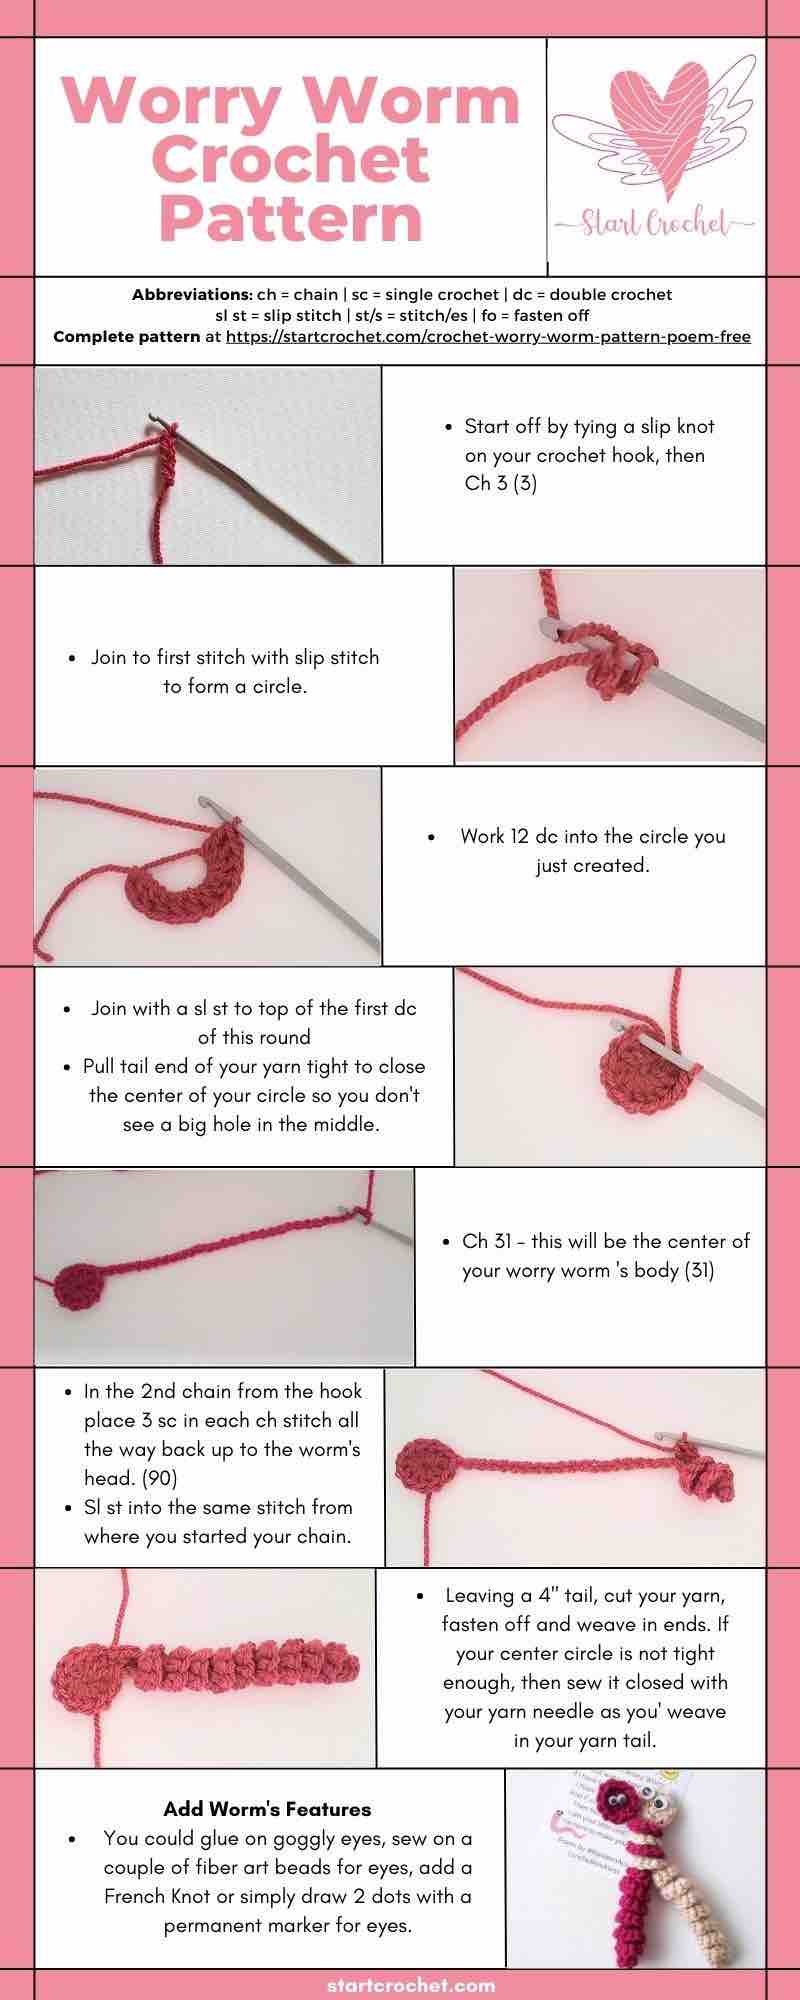 Worry-Worm-Crochet-Pattern-Infographic